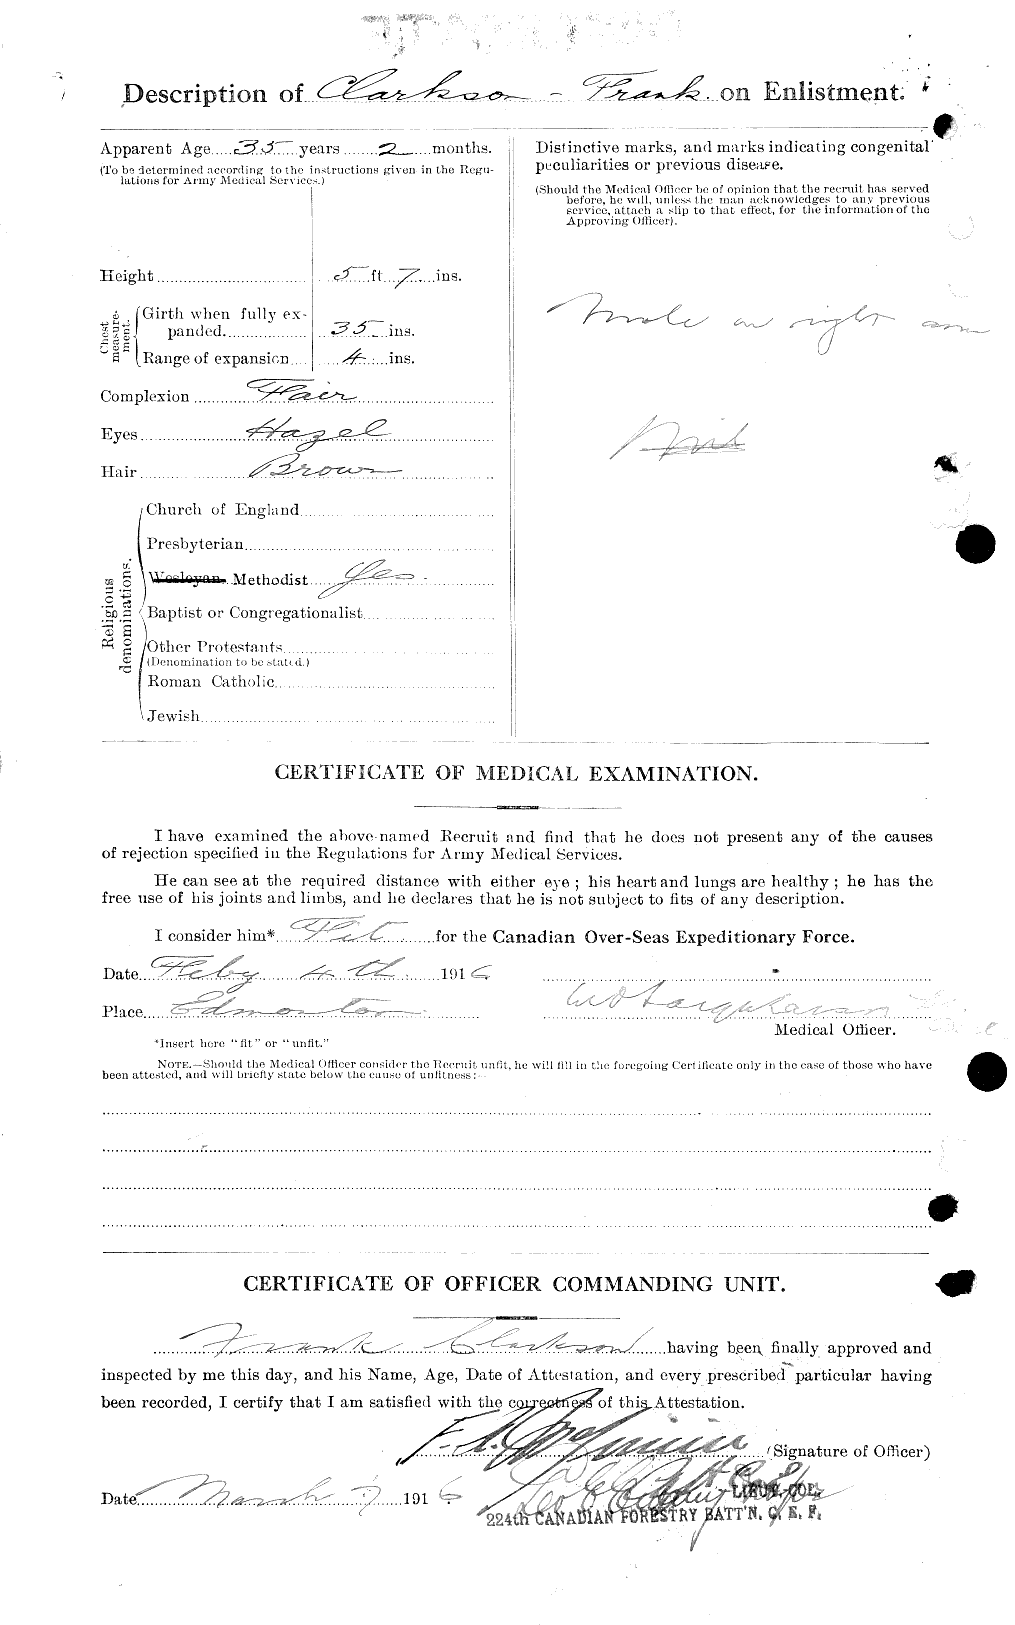 Personnel Records of the First World War - CEF 023637b